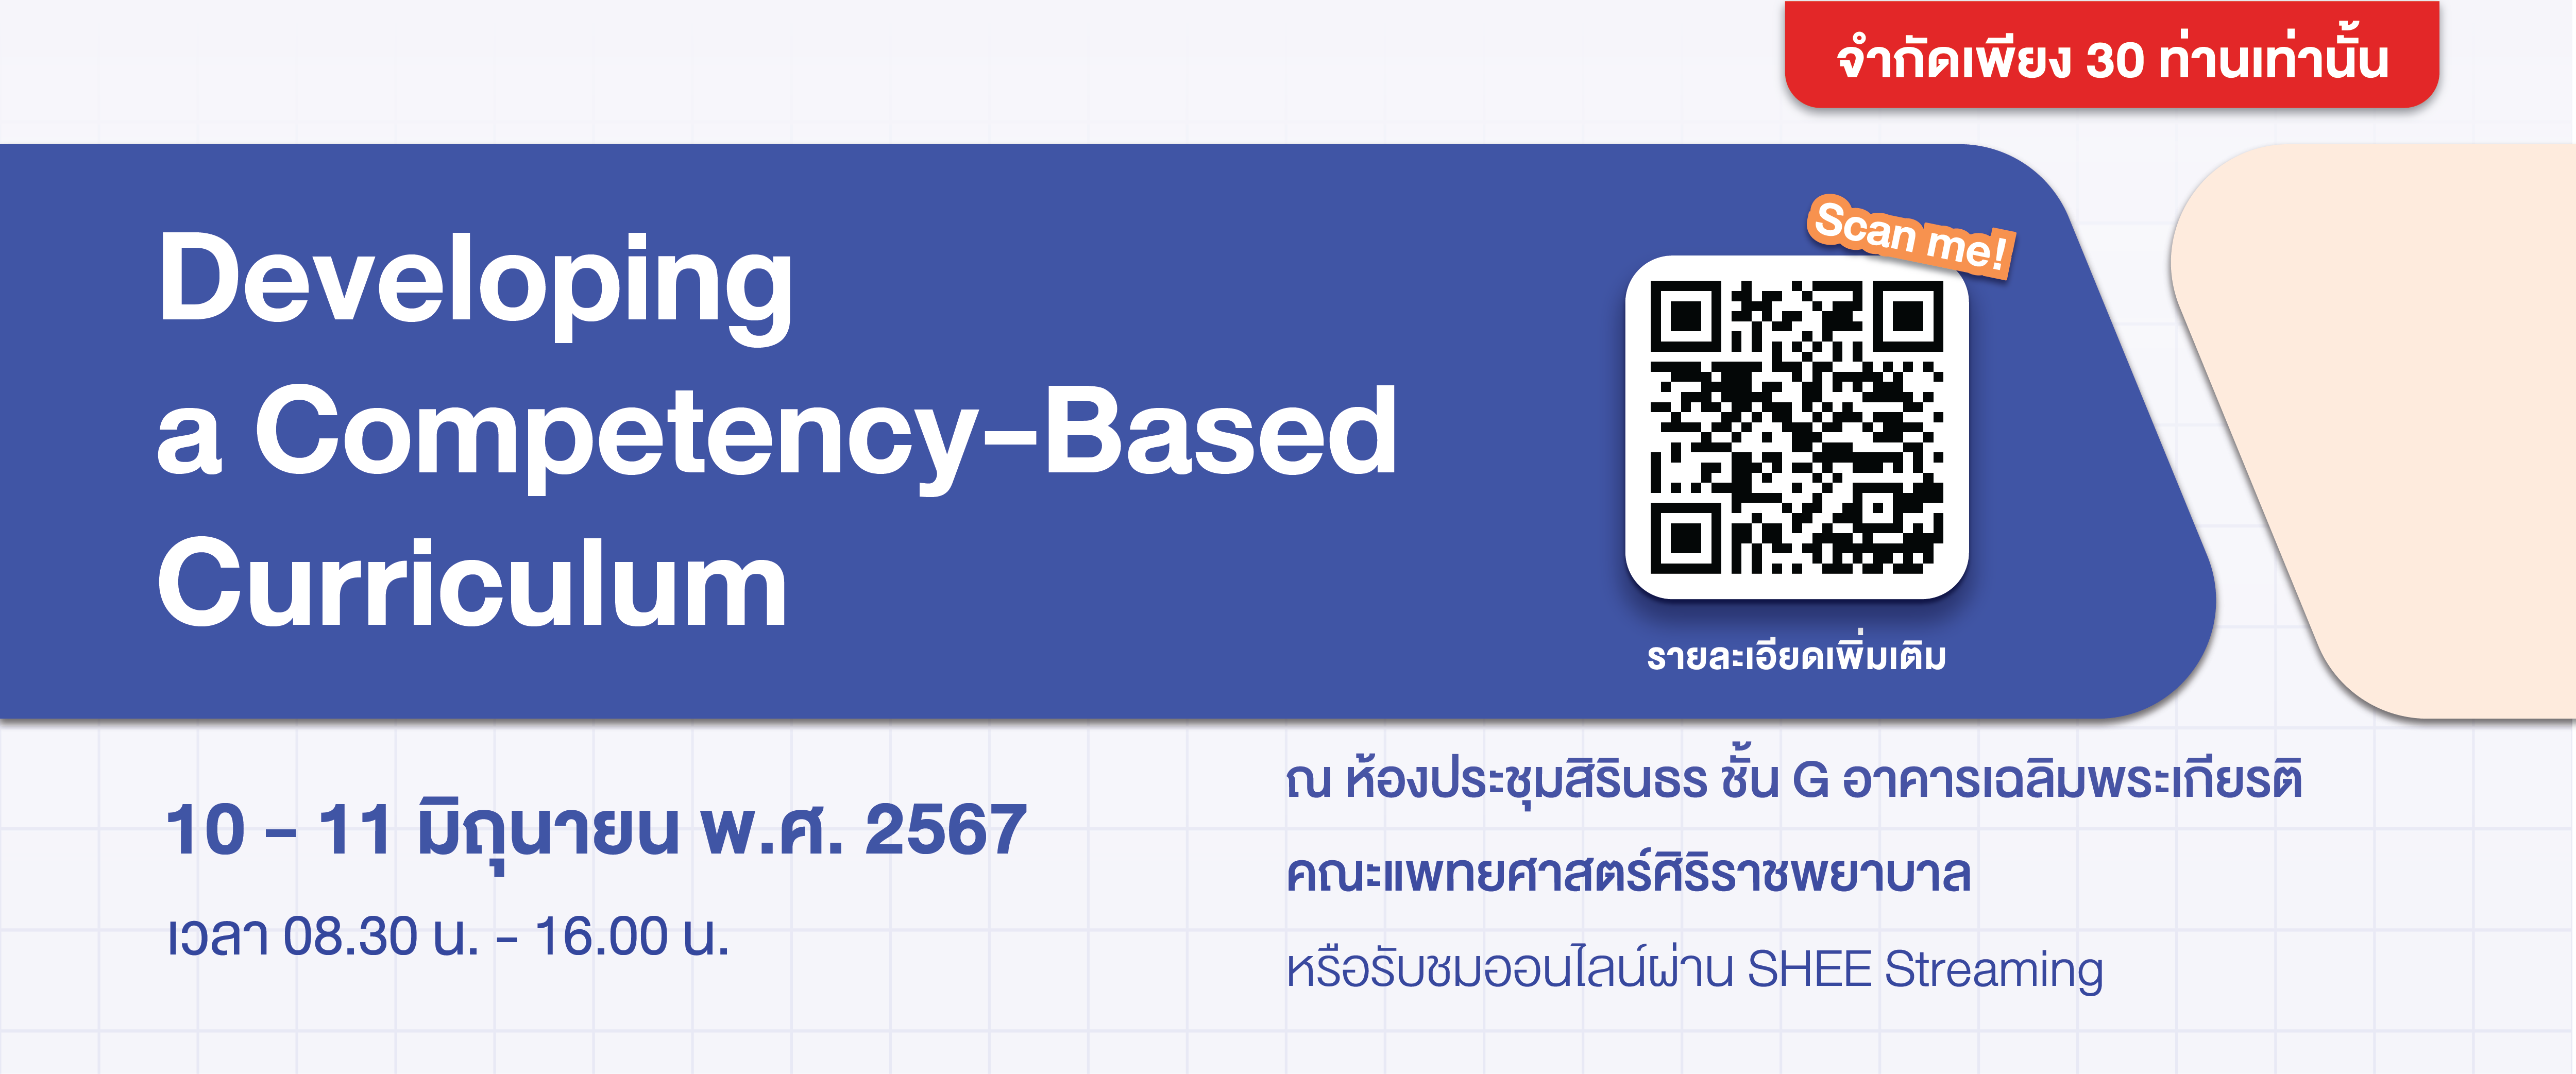 Developing a Competency-Based Curriculum ประจำปี 2567